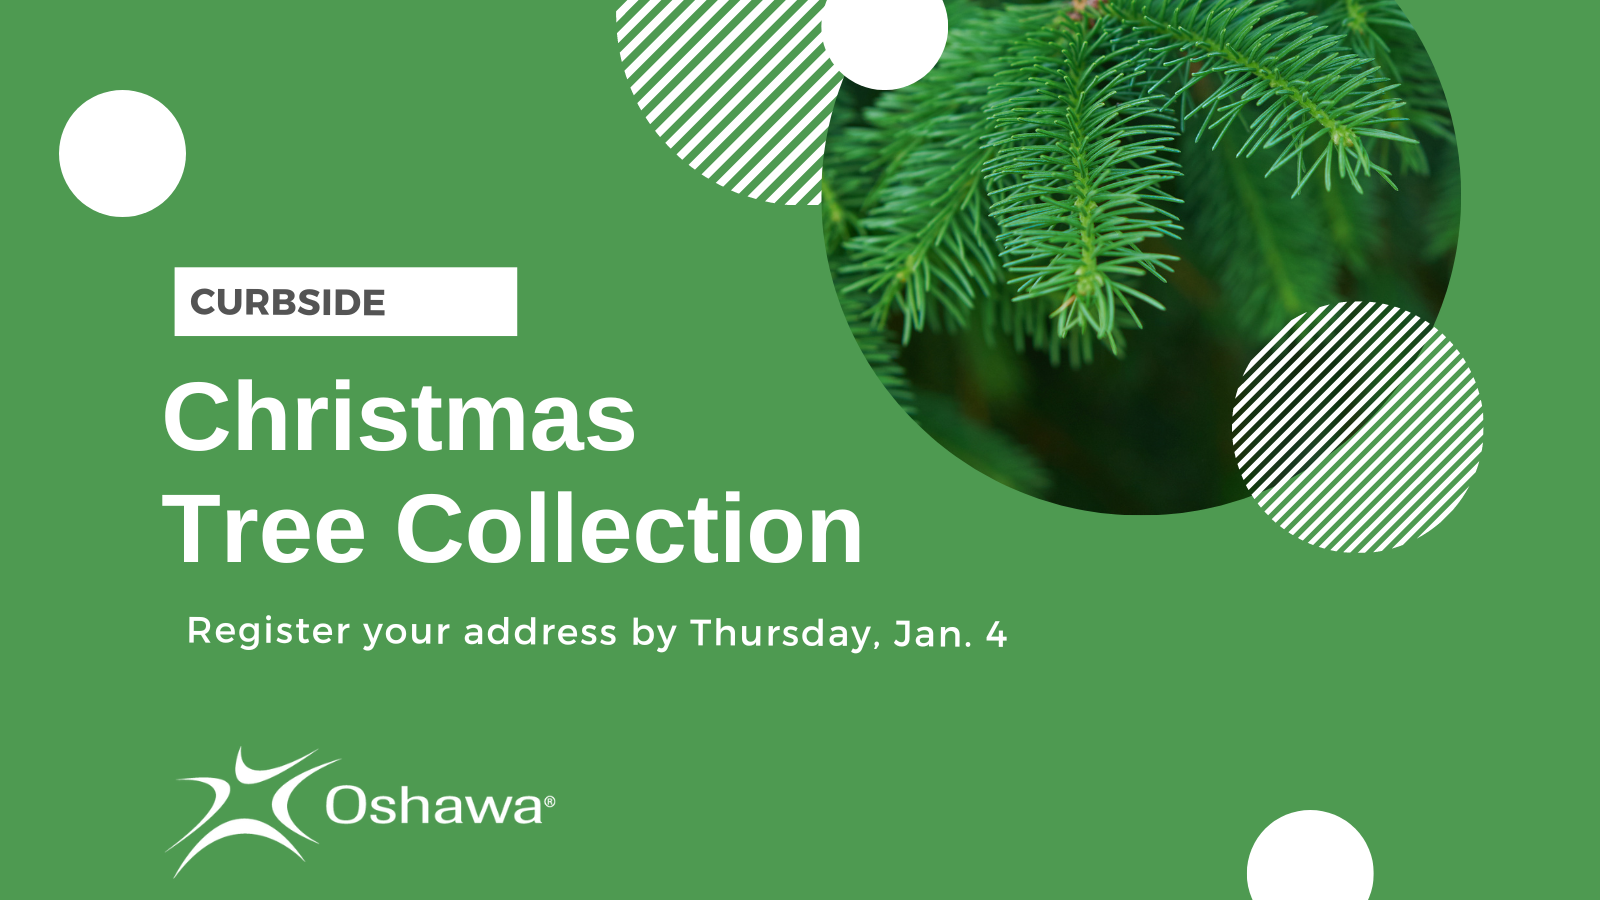 Green background with the words "Curbside Christmas Tree Collection. Register your address by Thursday, Jan. 5. Oshawa logo